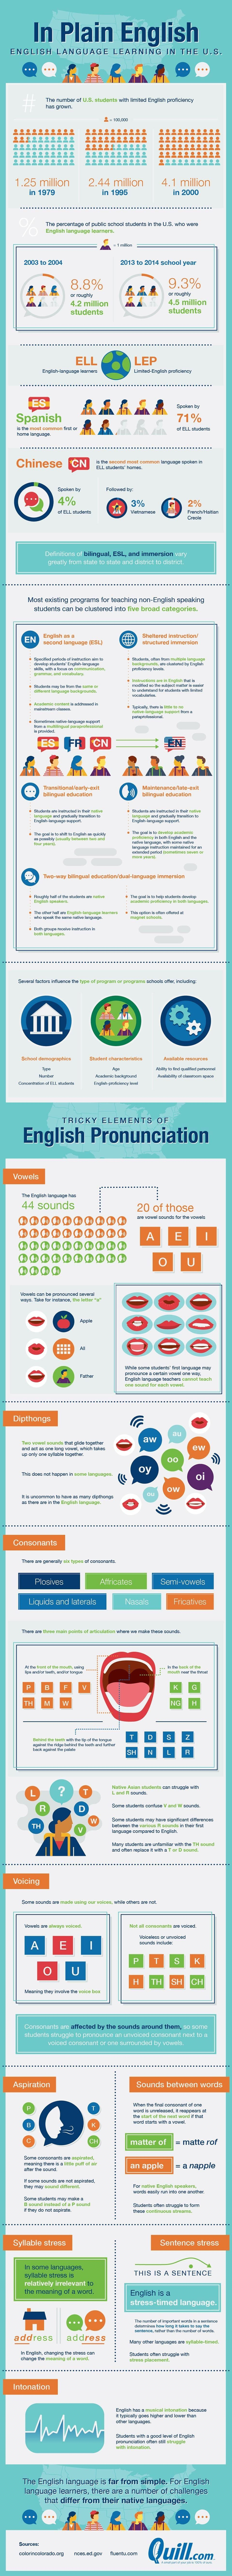 English Language Learning in the U.S. Infographic